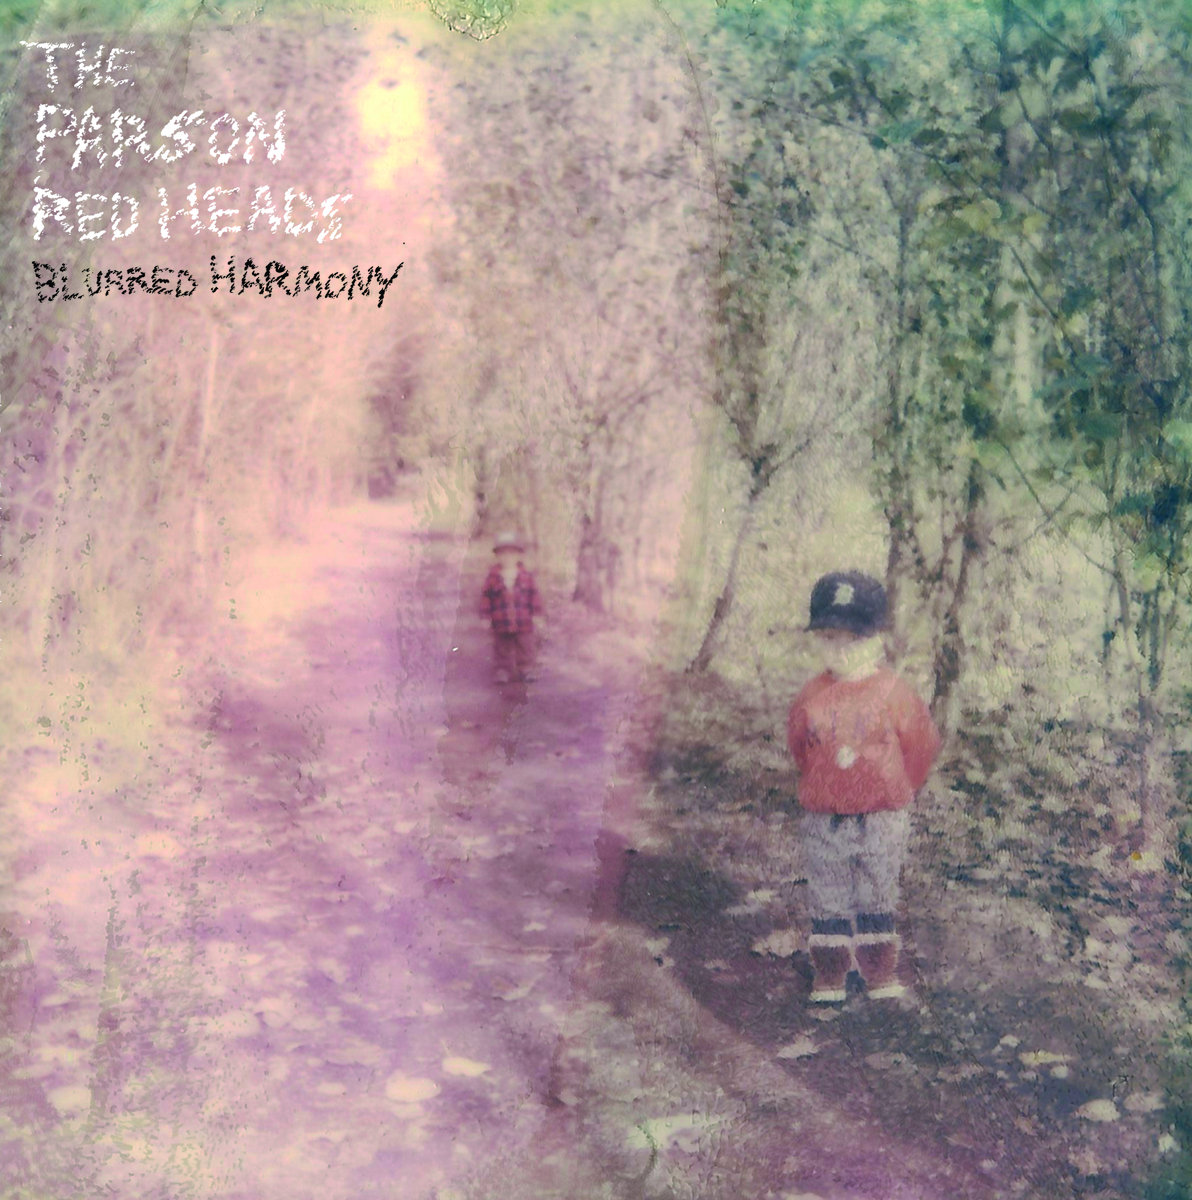 The Parson Red Heads - Blurred Harmony (2017)